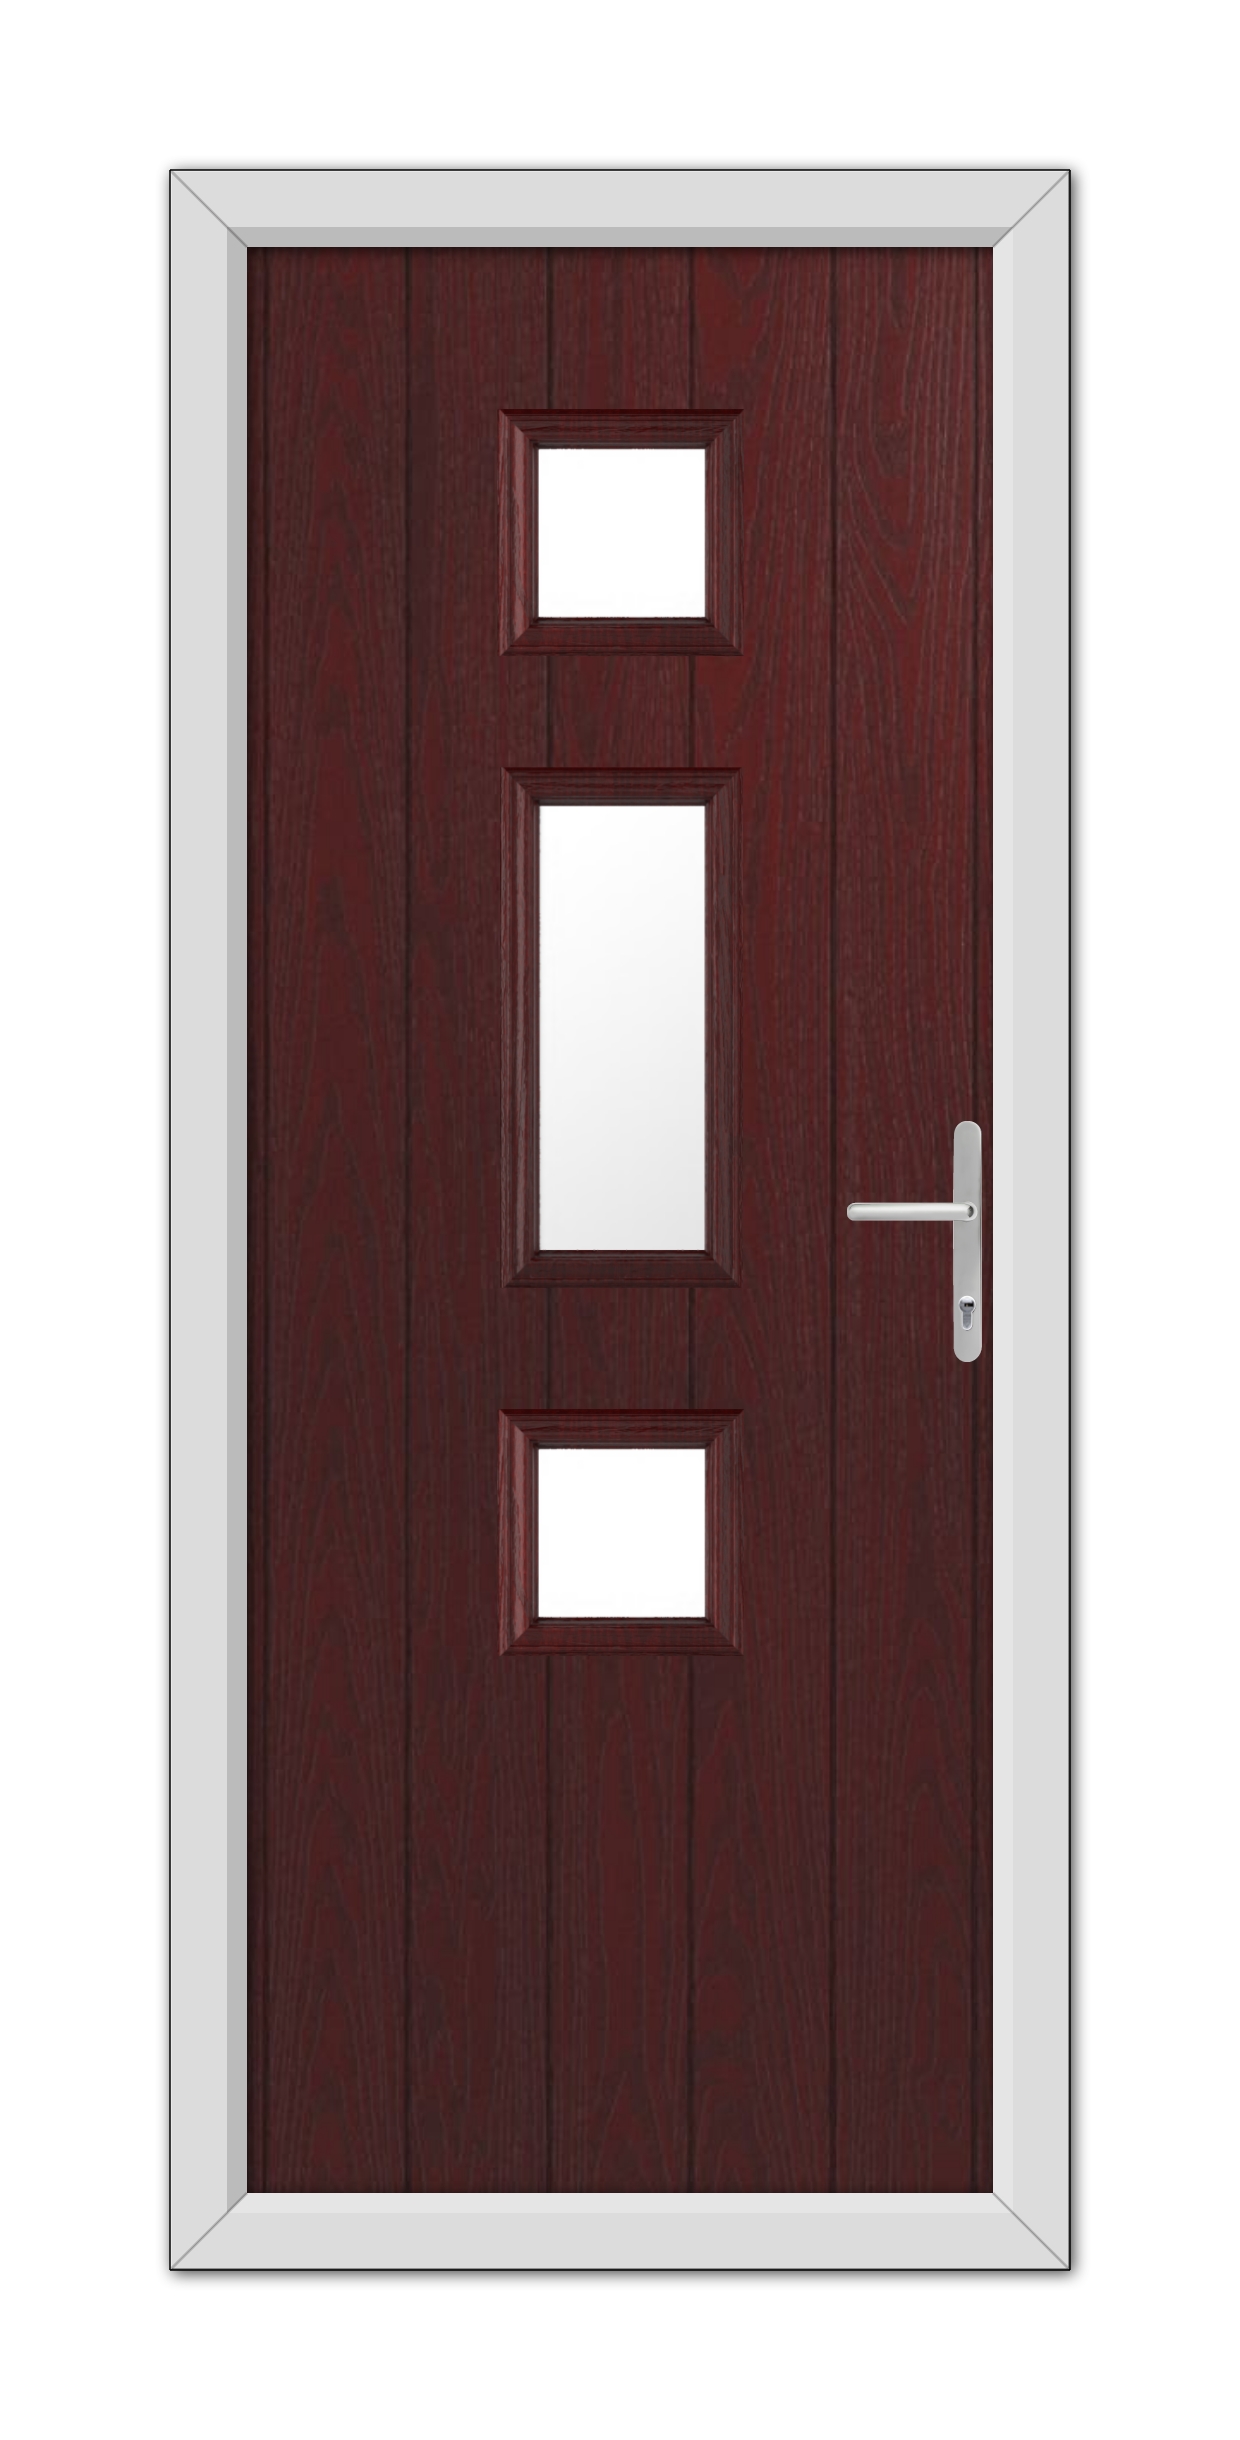 A modern Rosewood York Composite Door 48mm Timber Core featuring three rectangular glass panels and a white handle, set within a white frame.